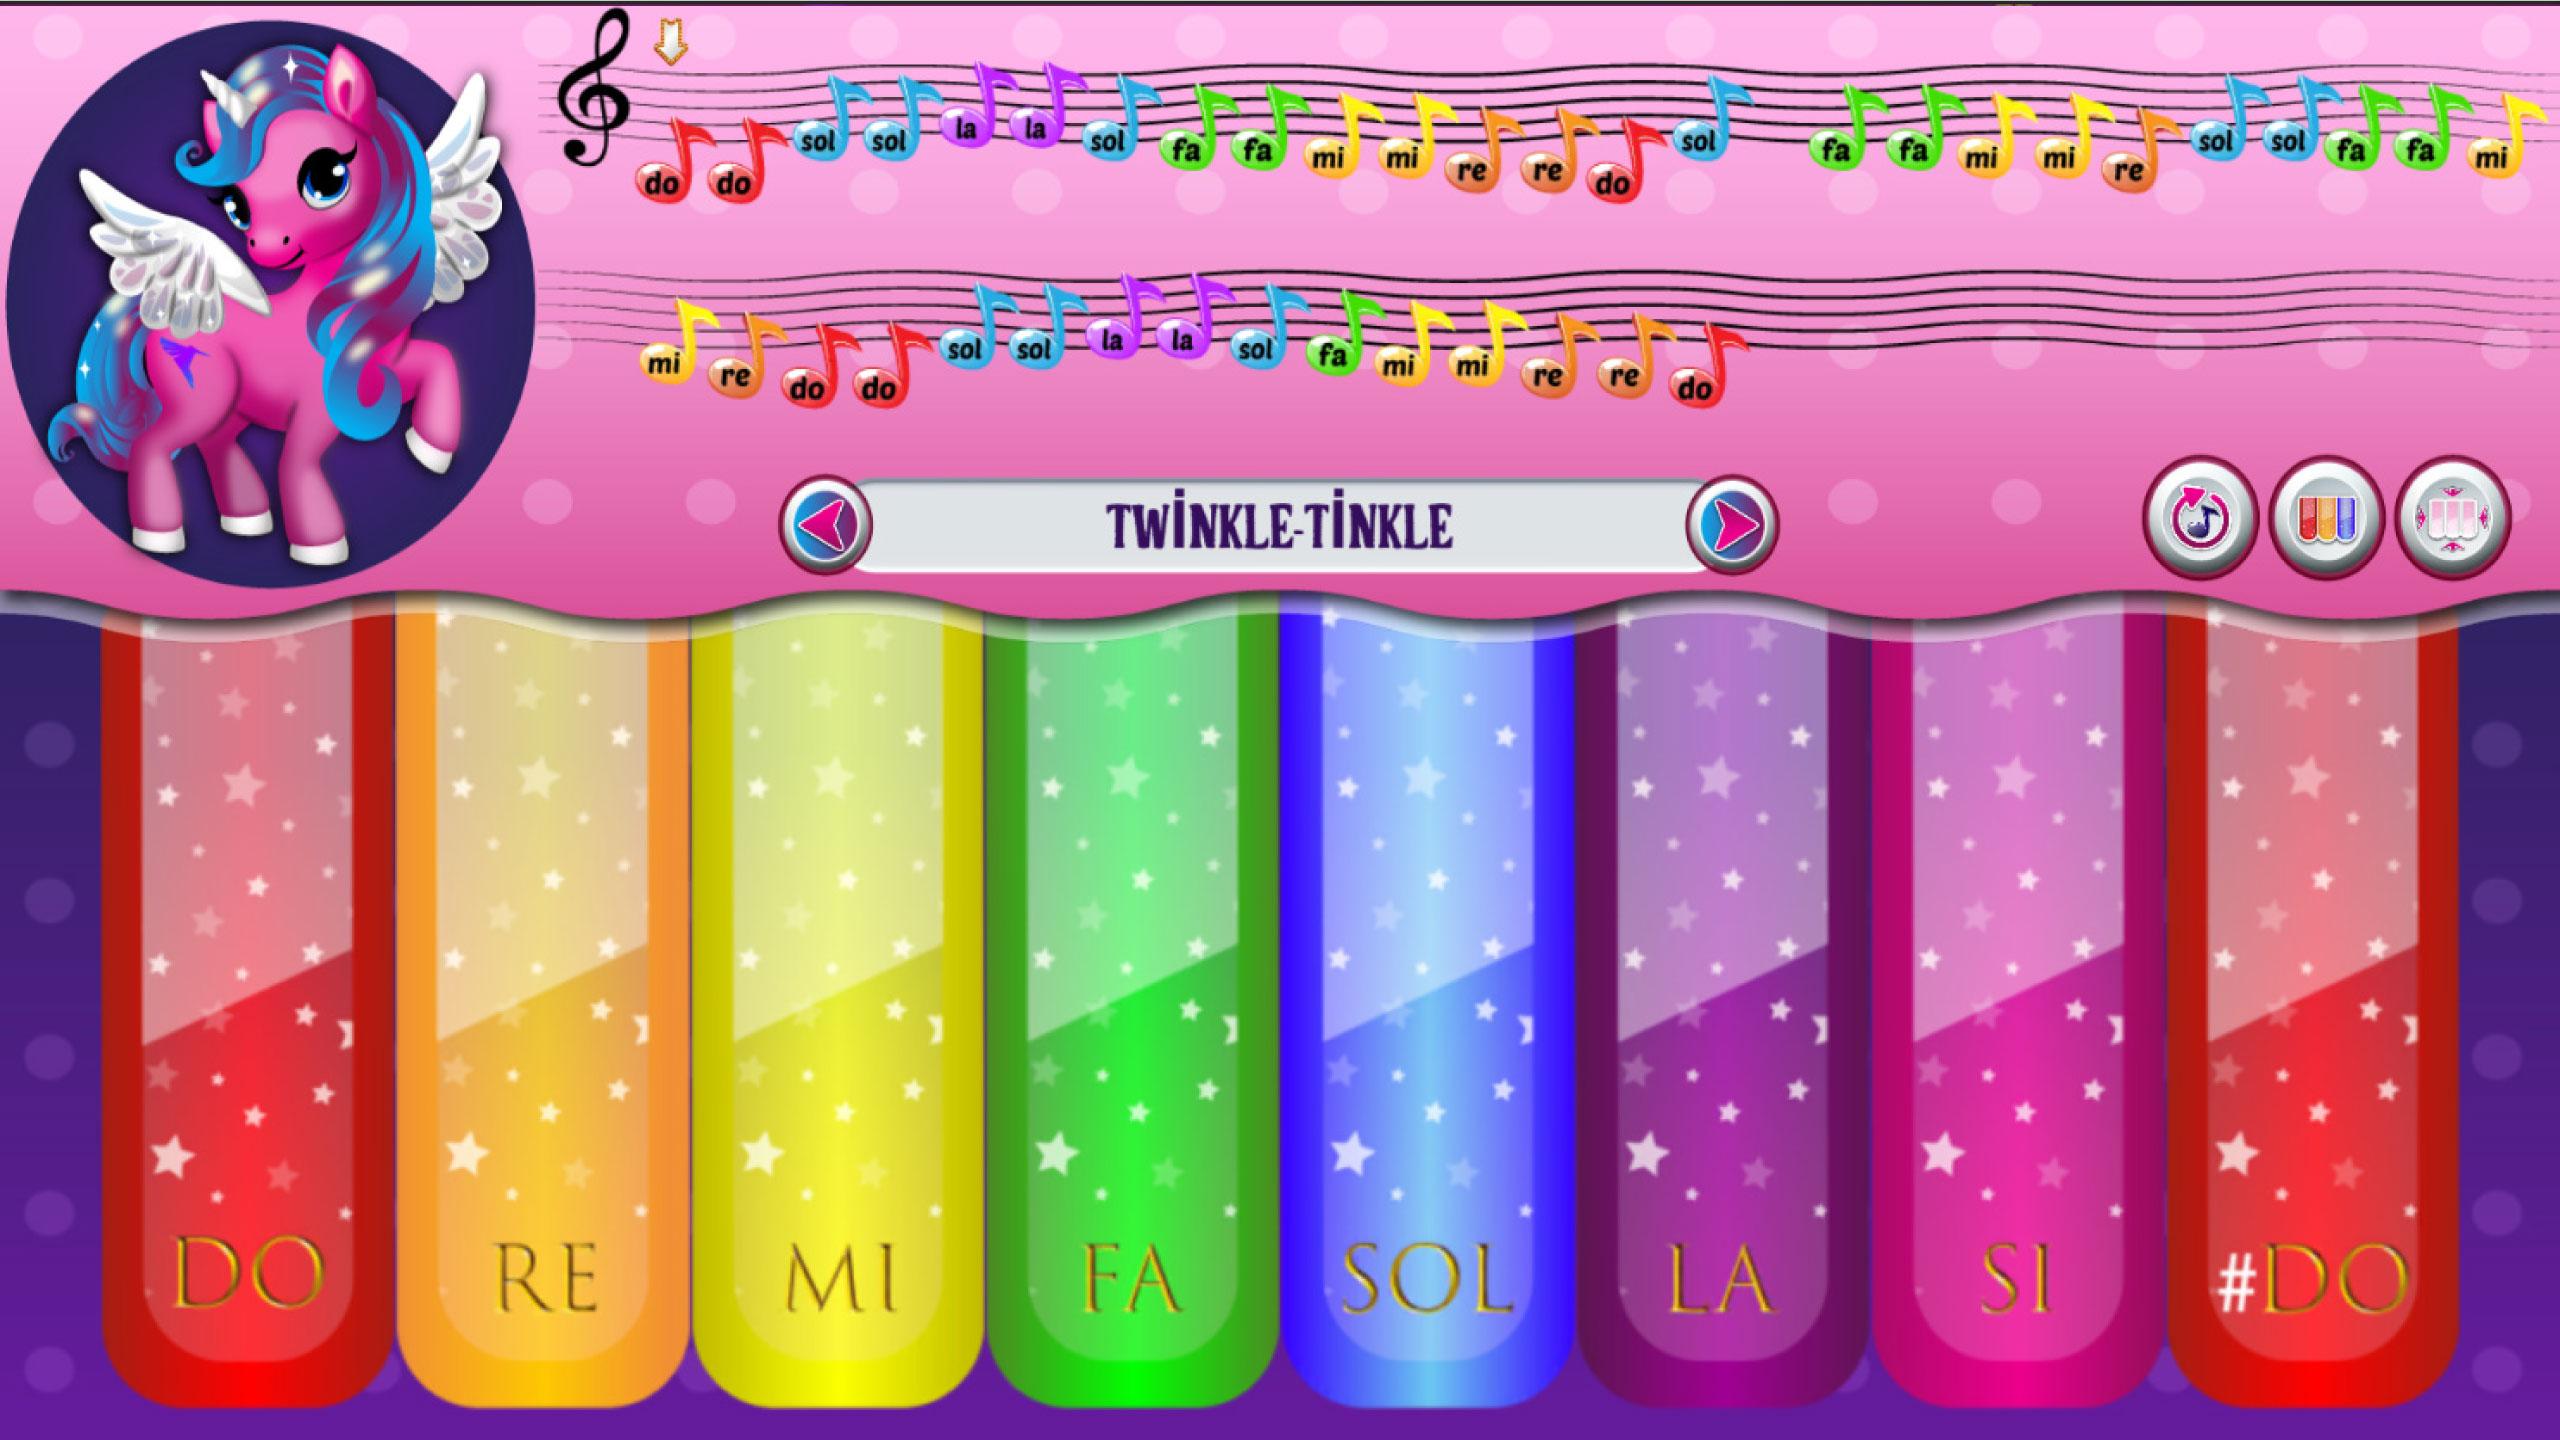 My Colorful Litle Pony Instrument - Piano 2.0 Screenshot 12